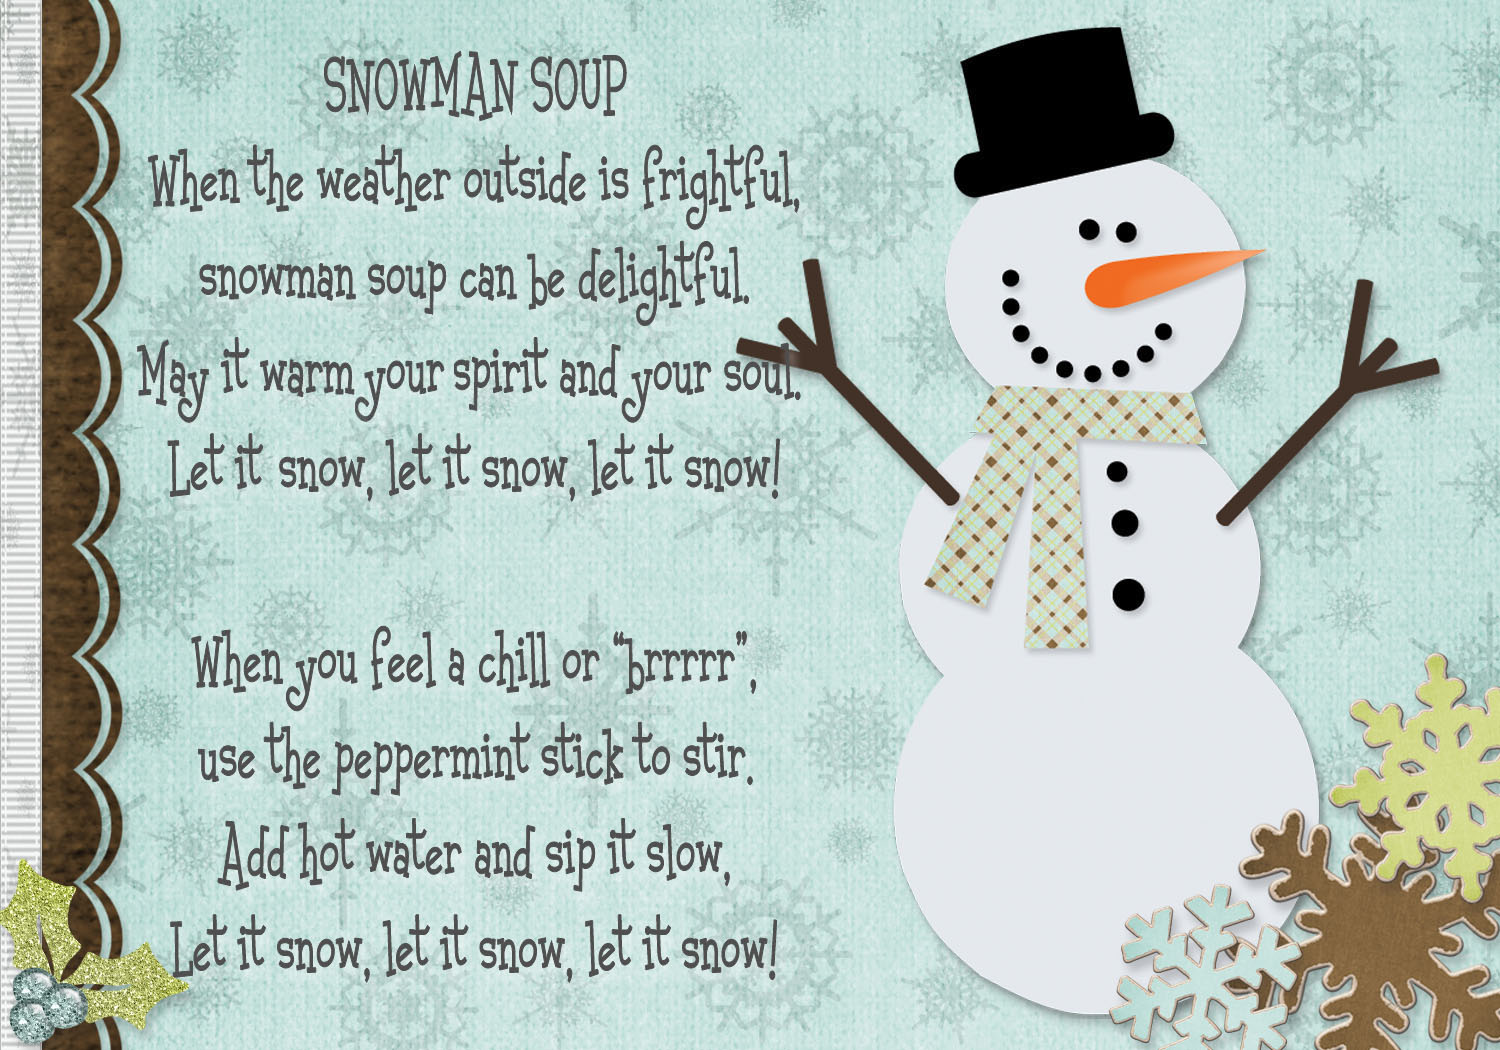 snowmansoup Snowman soup, Snowman soup poem, Soup gifts